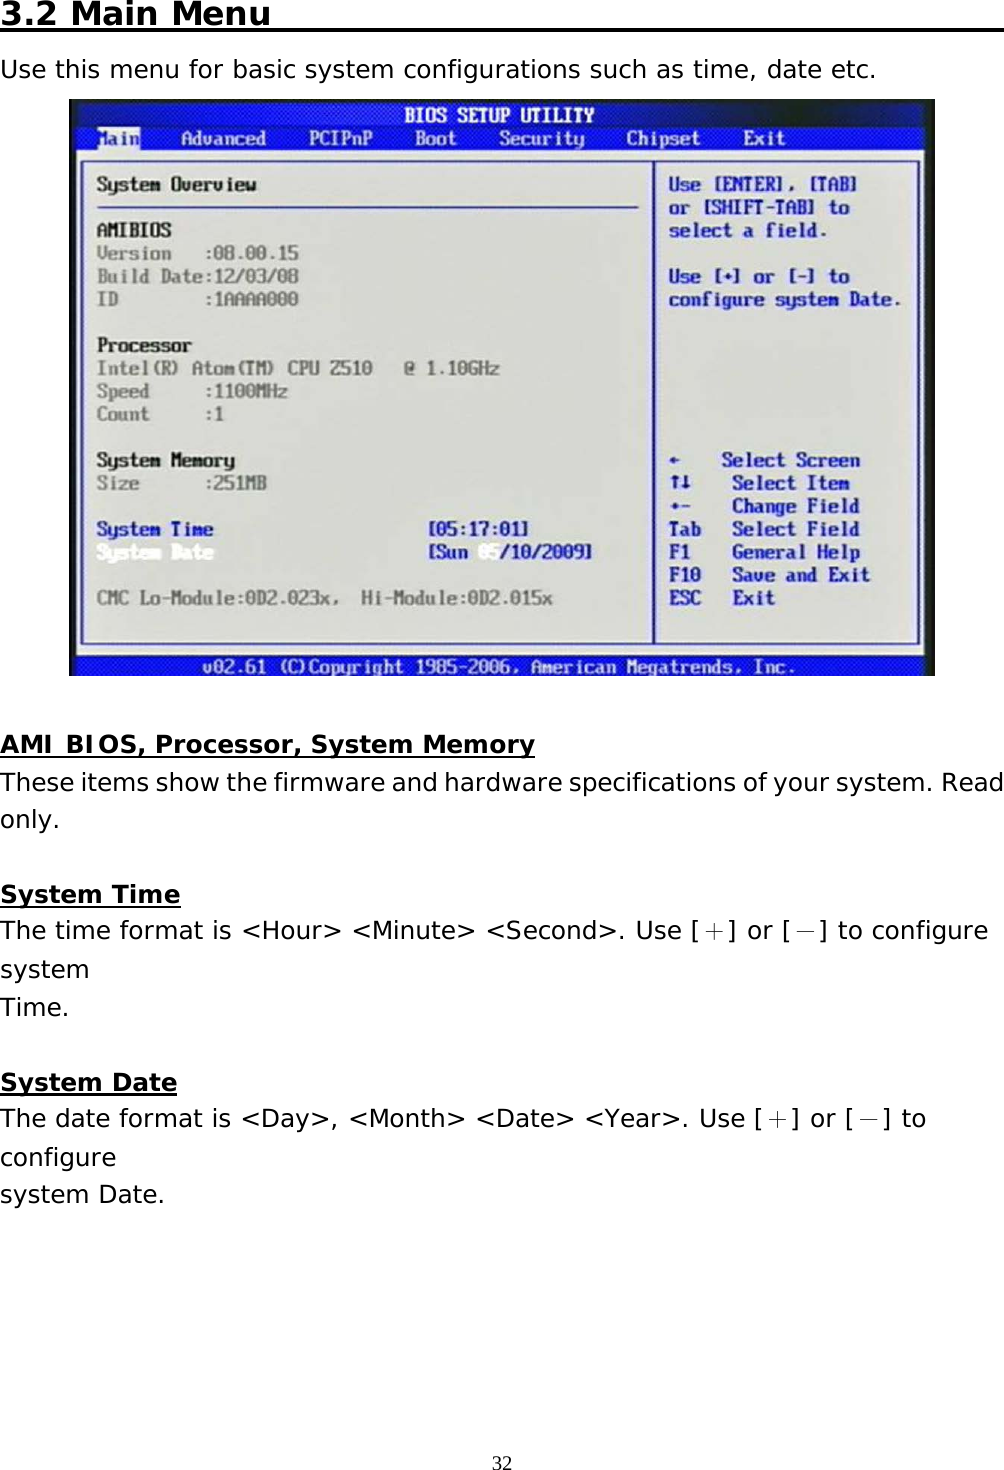  32 3.2 Main Menu                                             Use this menu for basic system configurations such as time, date etc.   AMI BIOS, Processor, System Memory These items show the firmware and hardware specifications of your system. Read only.  System Time The time format is &lt;Hour&gt; &lt;Minute&gt; &lt;Second&gt;. Use [＋] or [－] to configure system Time.  System Date The date format is &lt;Day&gt;, &lt;Month&gt; &lt;Date&gt; &lt;Year&gt;. Use [＋] or [－] to configure system Date.      